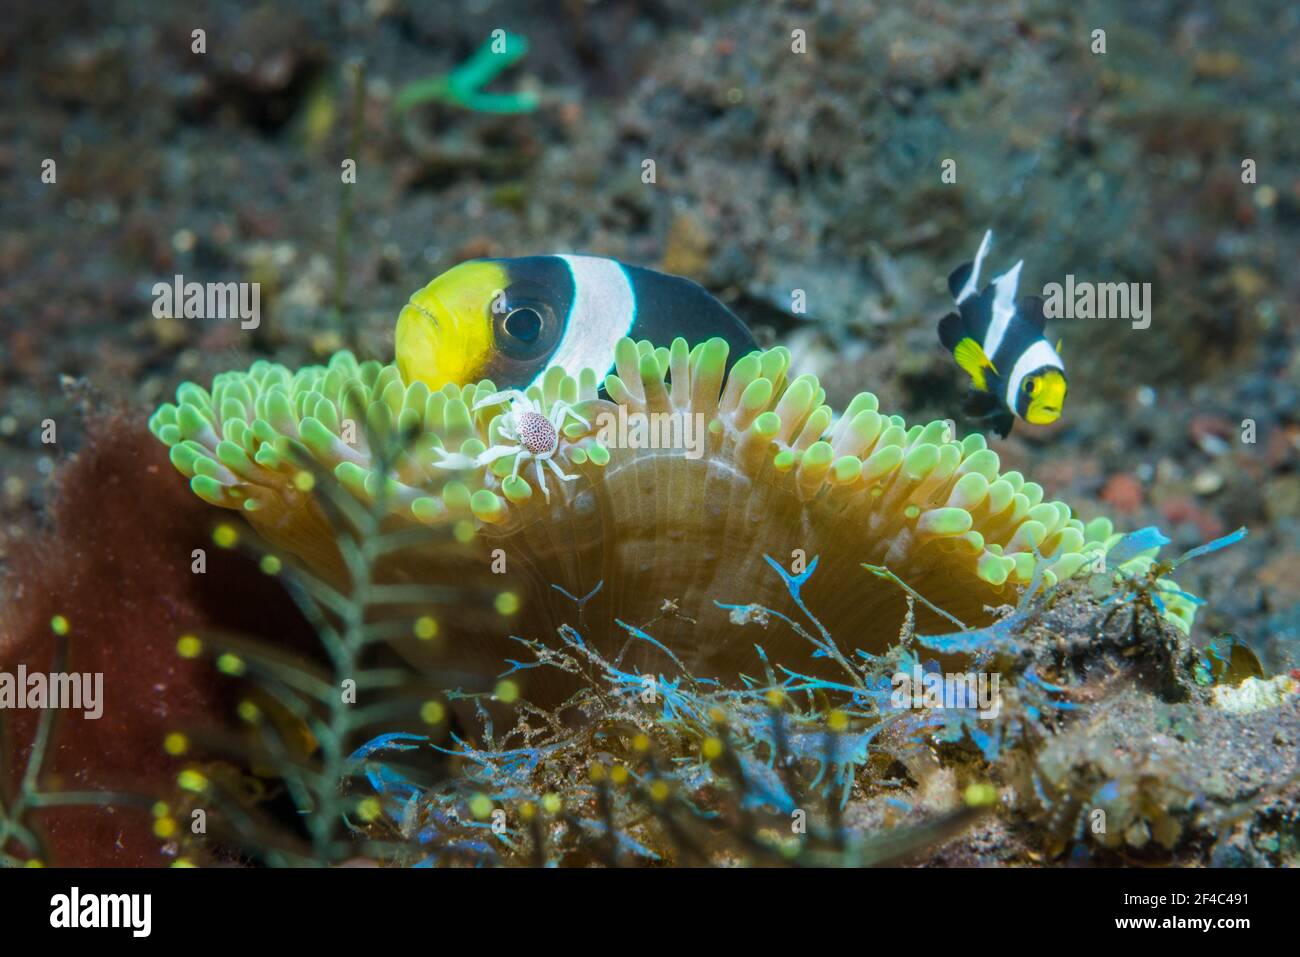 Saddleback anemonefish [Amphiprion polymnus] with a Spotted anemone porcelain crab [Neopetrolisthes maculatus] perched on the edge of the anemone.  Tu Stock Photo